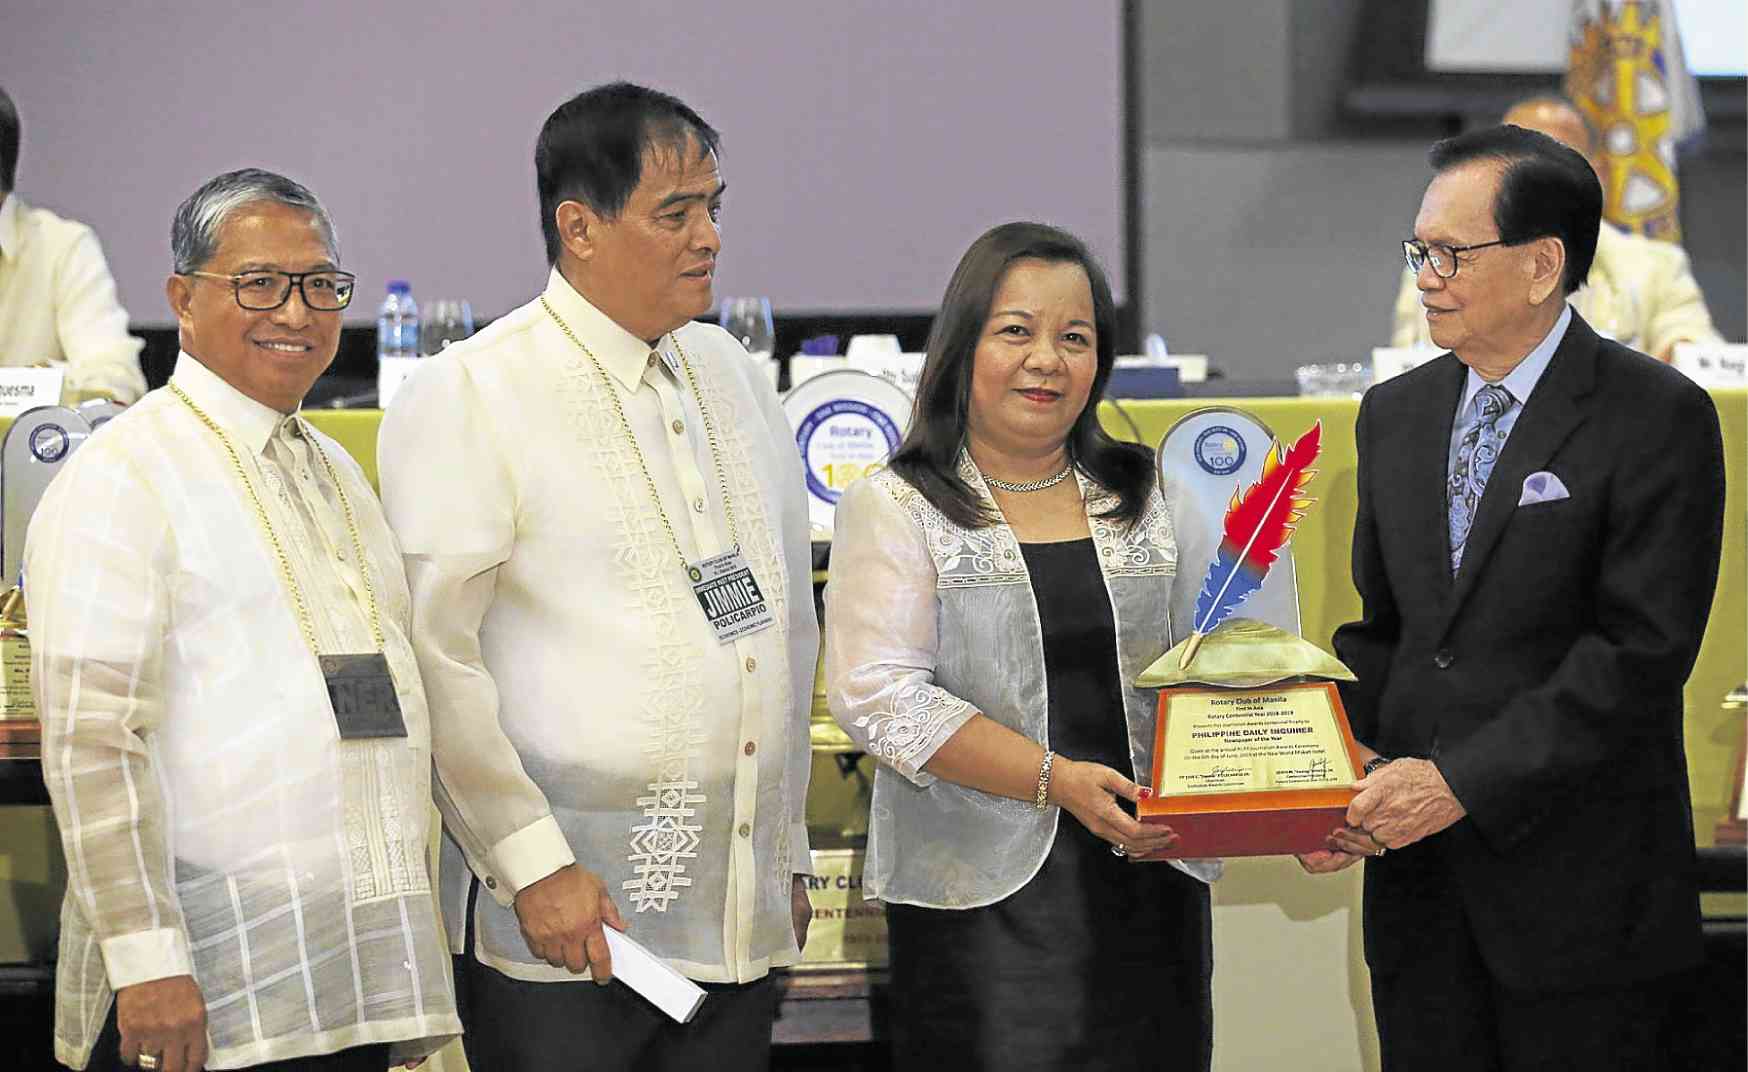 Rotarians’ choice: Inquirer Newspaper of the Year | Inquirer News